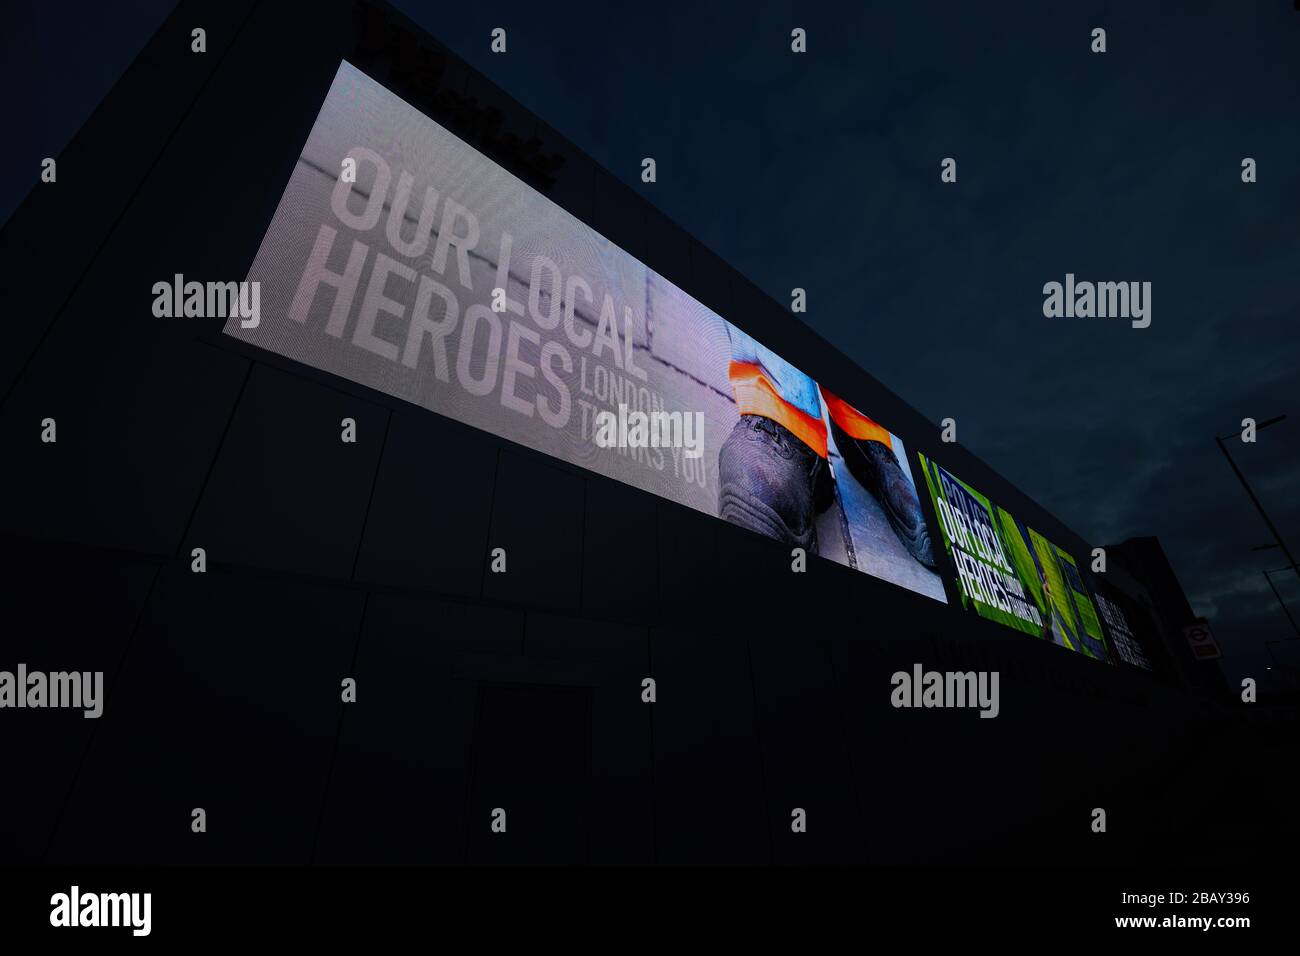 London, U.K. - 29 Mar 2020: A giant illuminated billboard in west London praises essential workers for their help during the coronavirus pandemic. Stock Photo